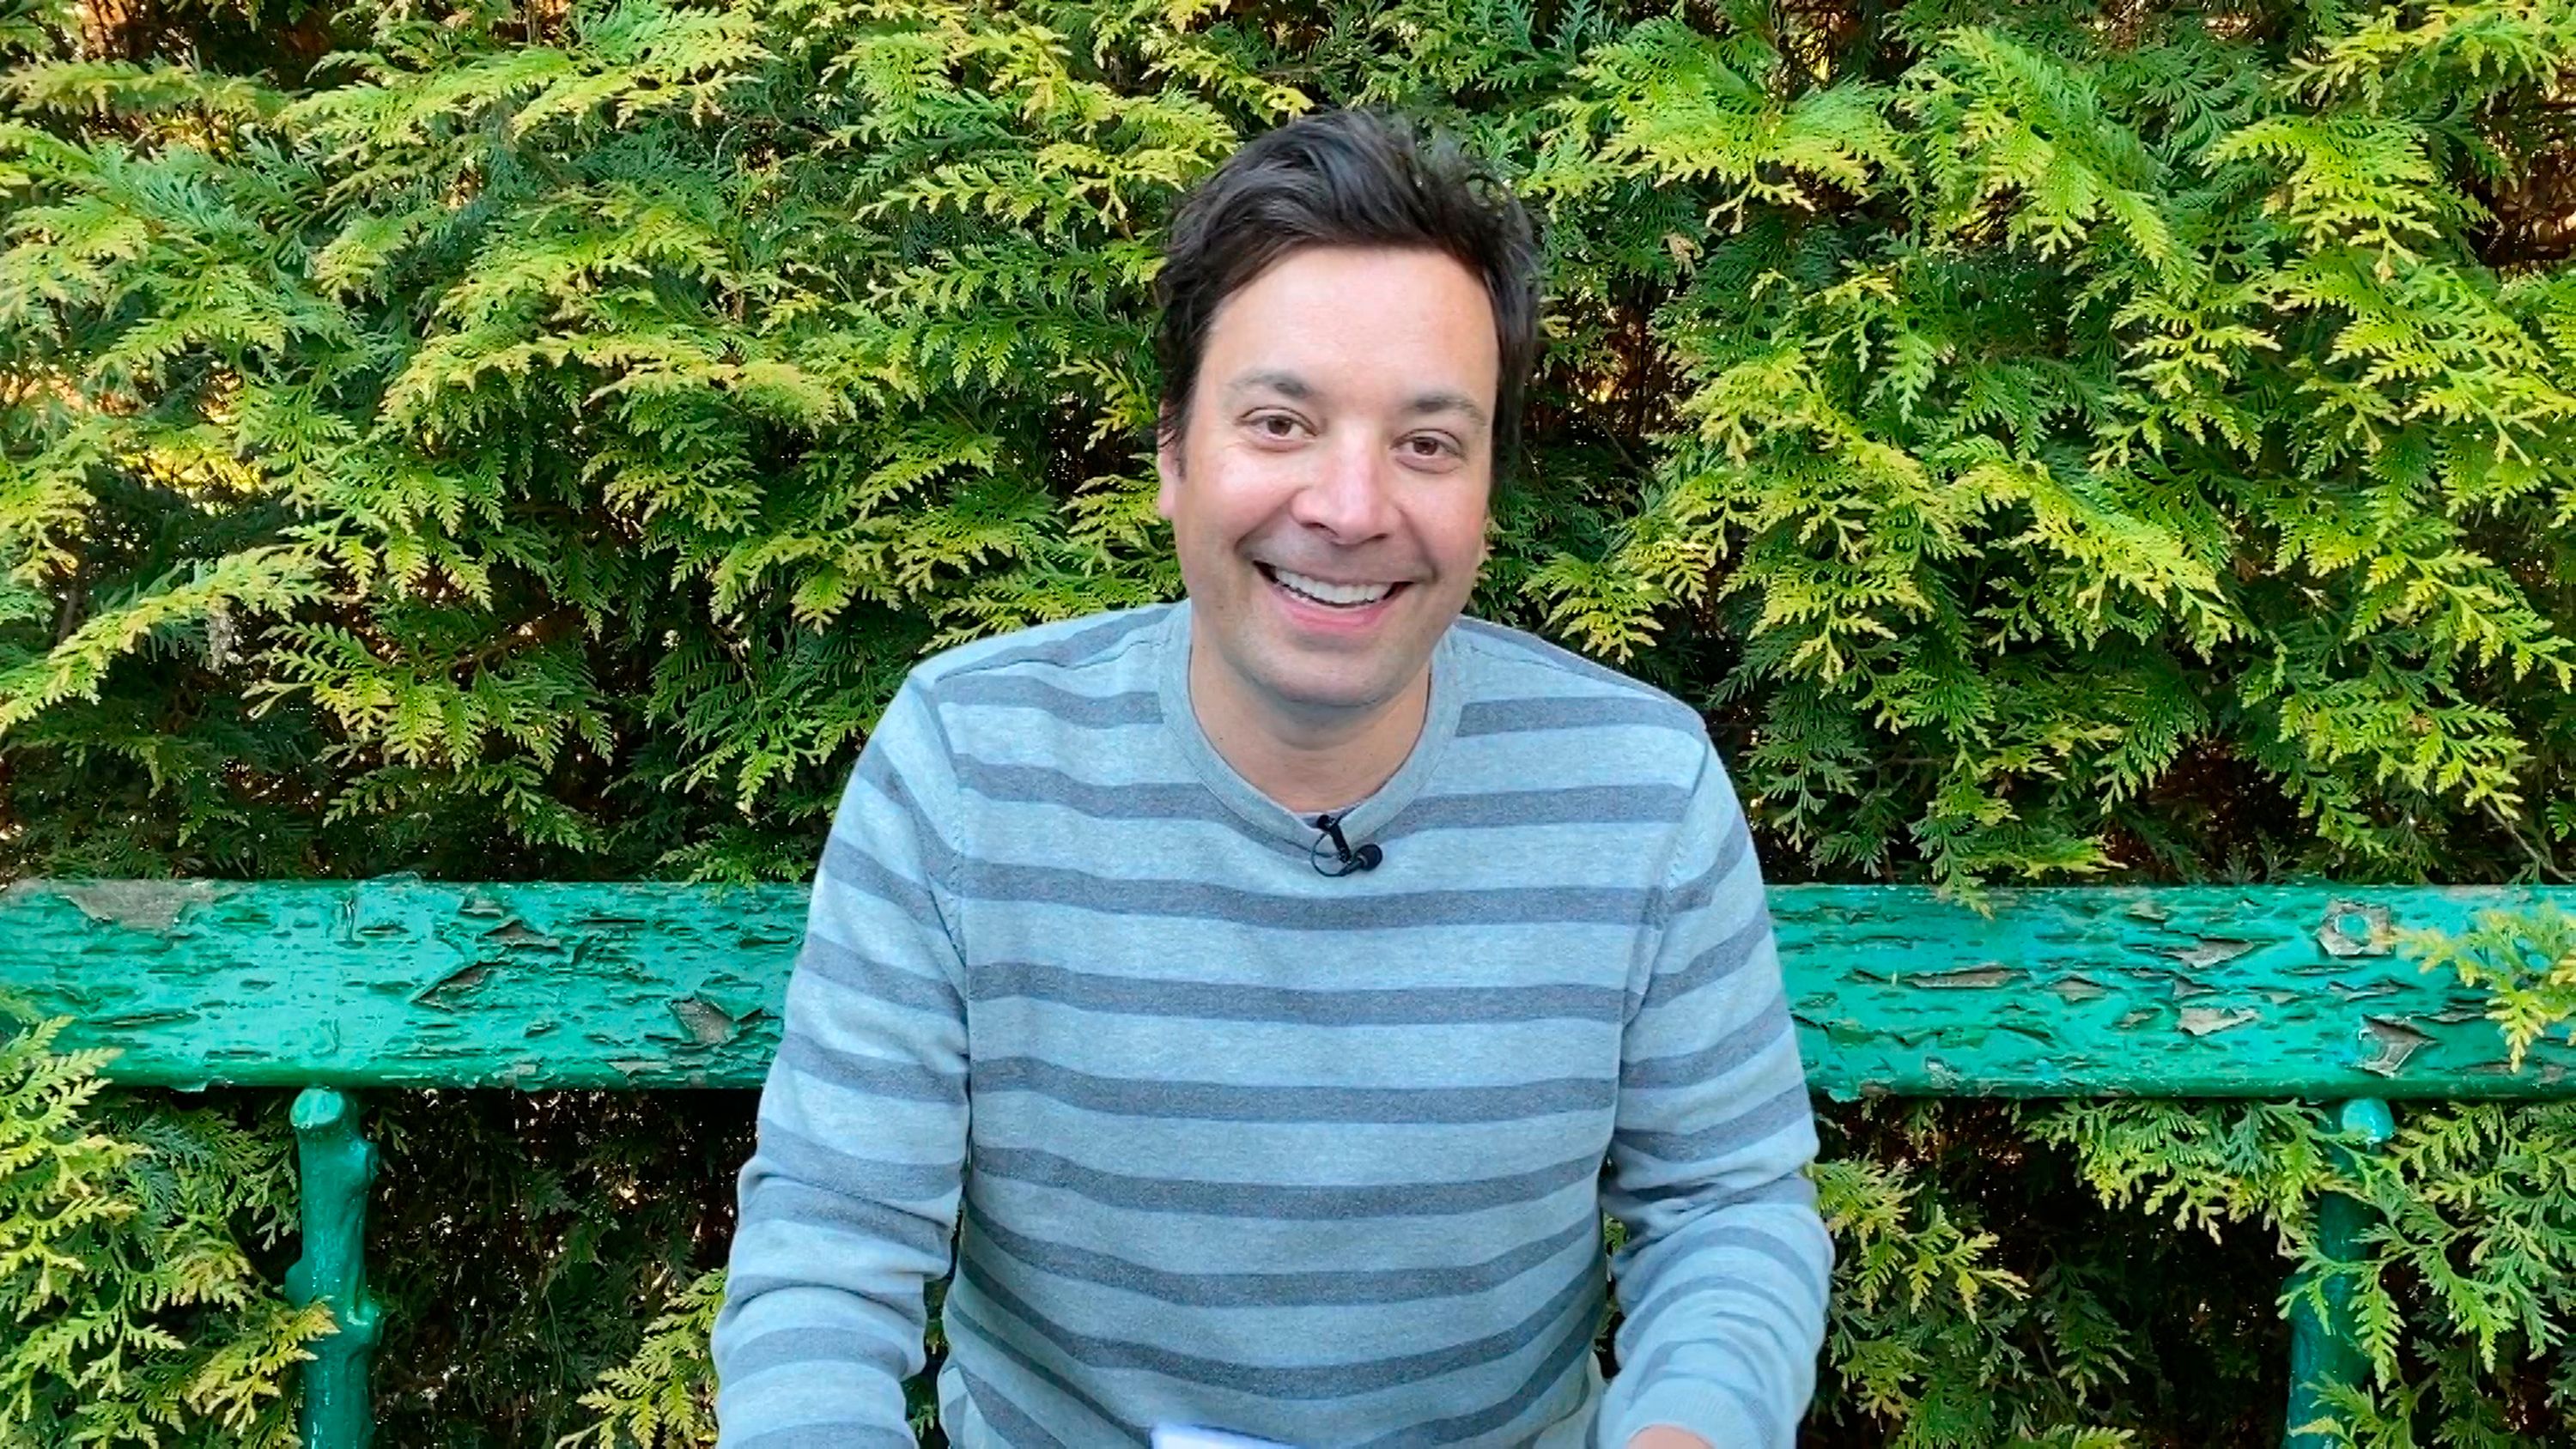 A portrait of the host of "The Tonight Show" Jimmy Fallon on May 7, 2020 | Photo: Getty Images